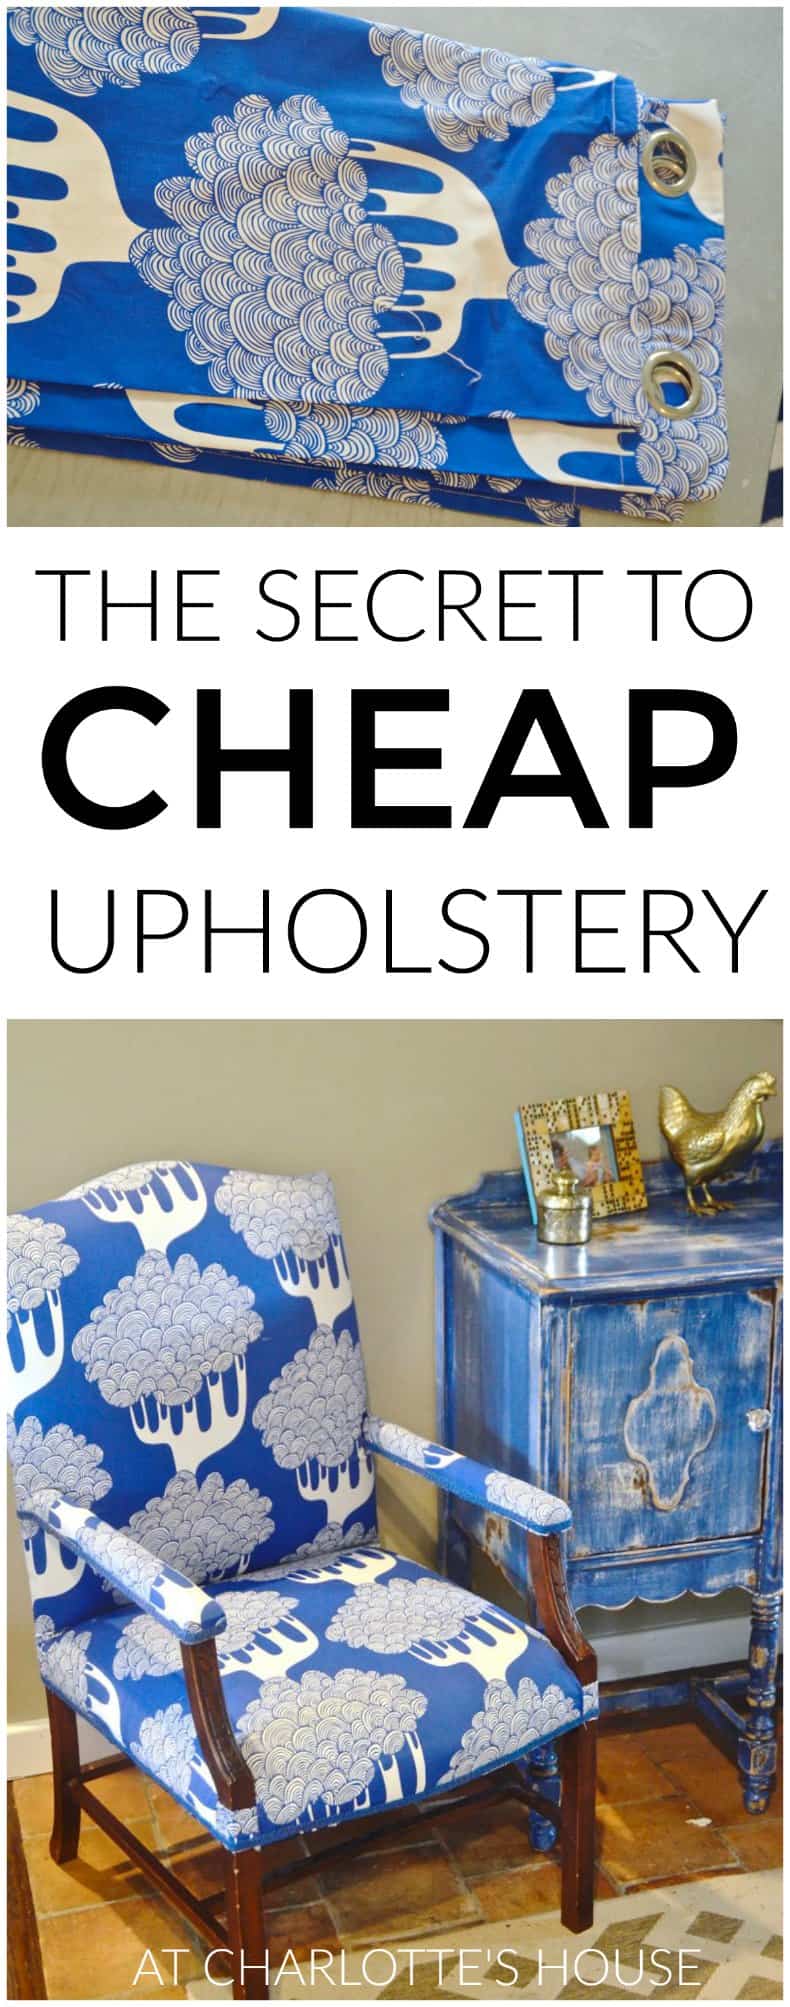 How to save money on upholstery using this simple supply.